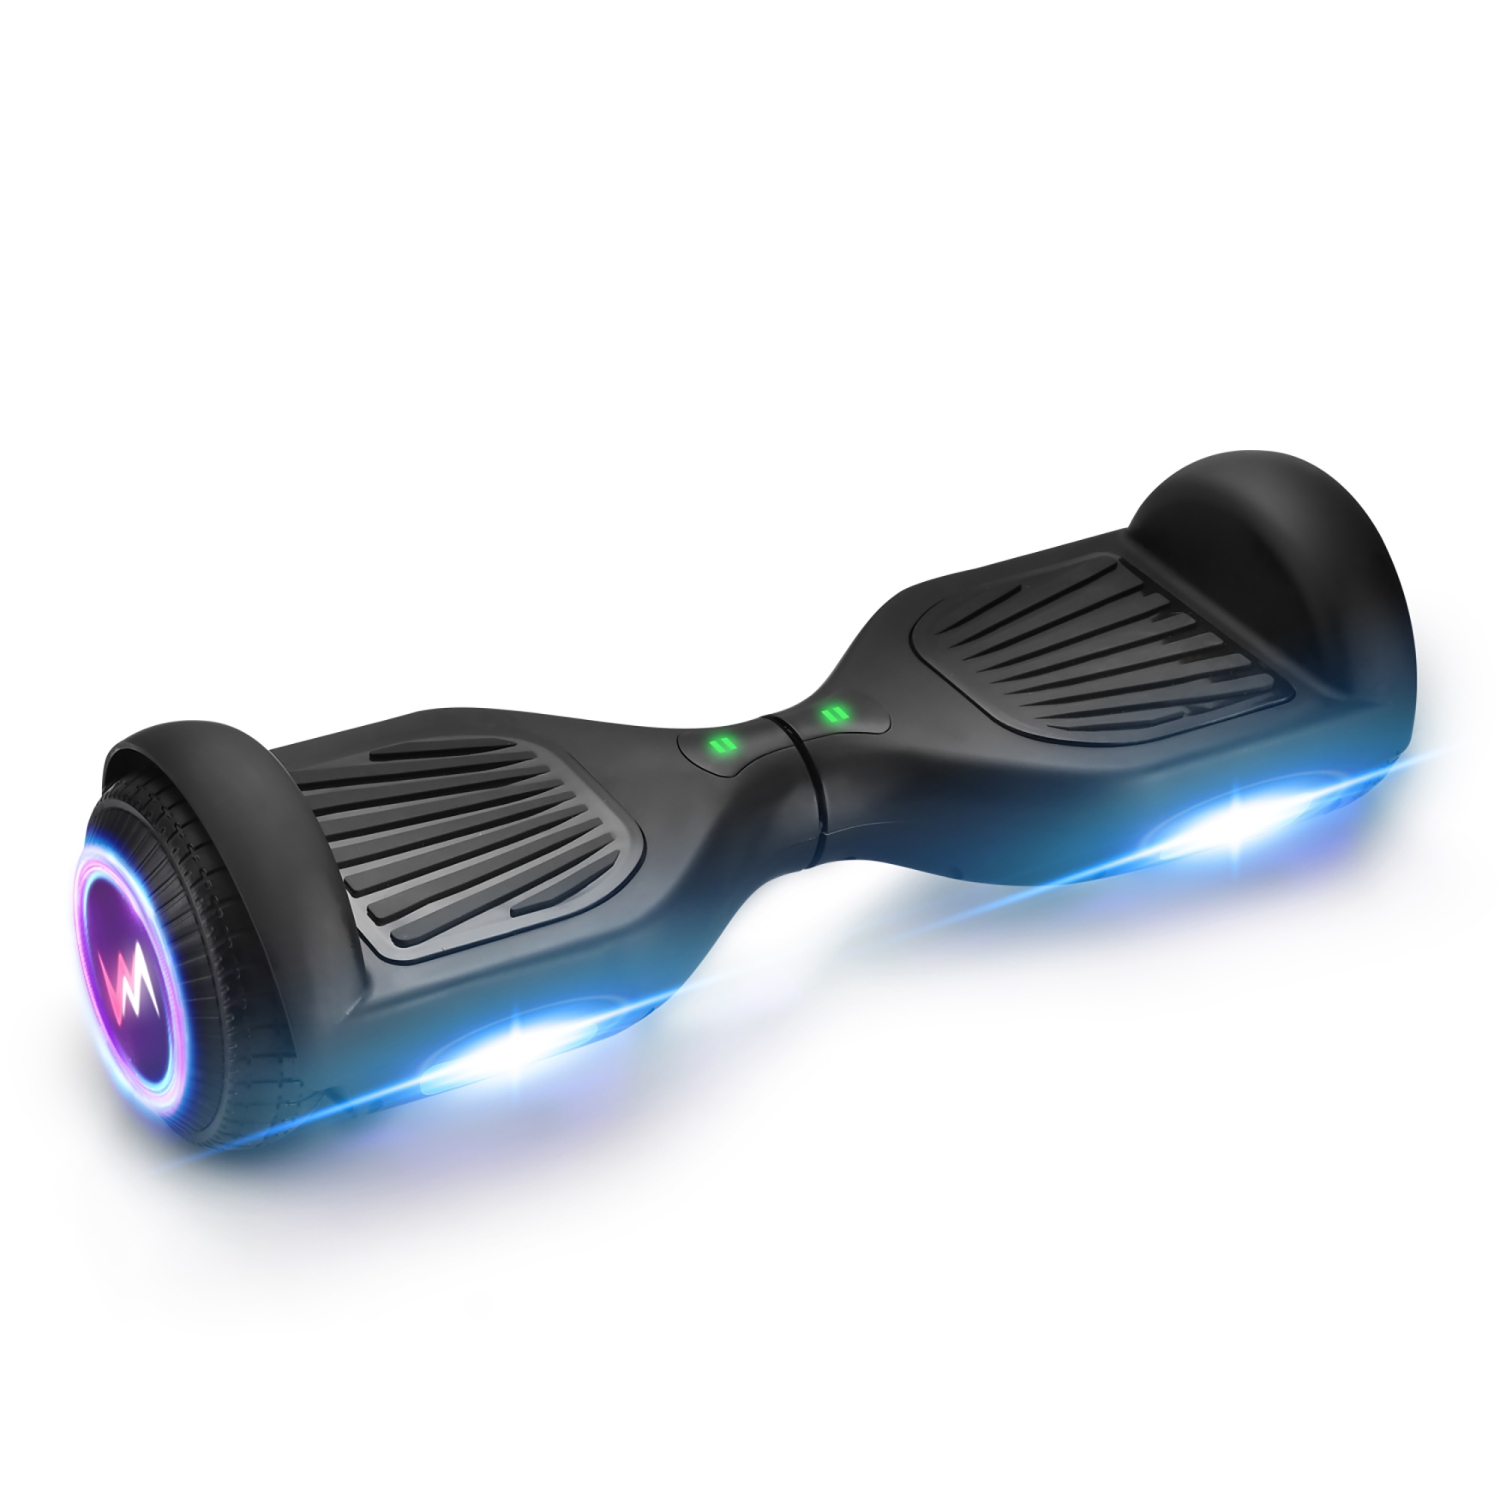 WEELMOTION Classic Mat Black Hoverboard with Music Speaker, LED Front Lights & Shining Wheels, All Terrain 6.5" UL 2272 Certified Hoverboard with free hover board bag